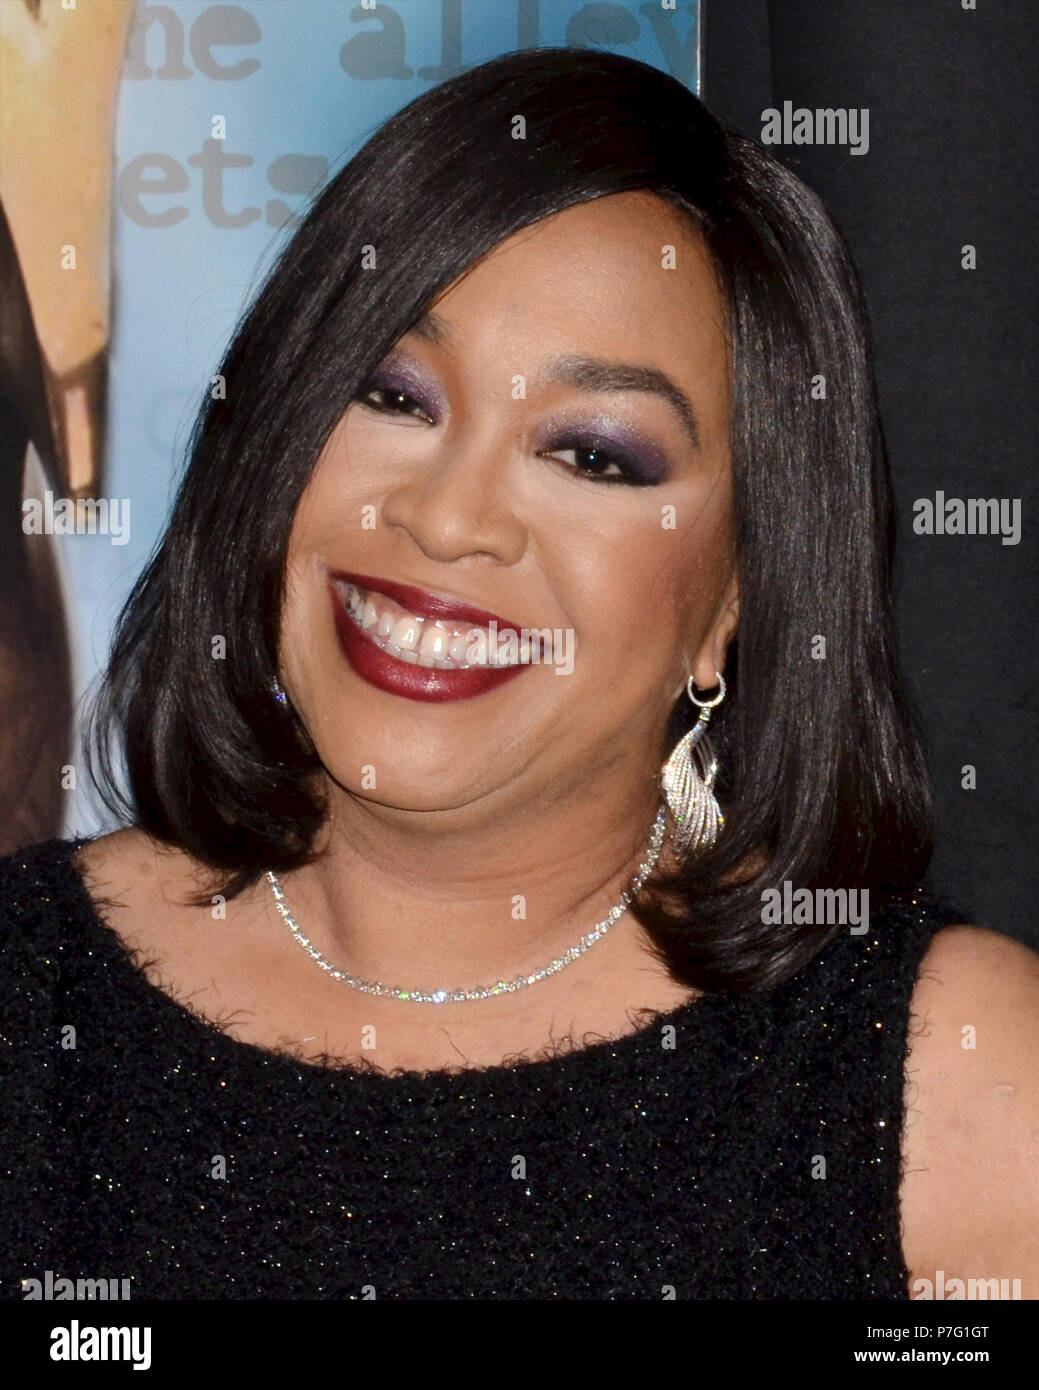 May 11, 2015 - Beverly Hills, California, USA - SHONDA RHIMES attends at the 2015 Writers Guild Awards L.A. Ceremony at the Hyatt Regency Century Plaza. (Credit Image: © Billy Bennight via ZUMA Wire) Stock Photo